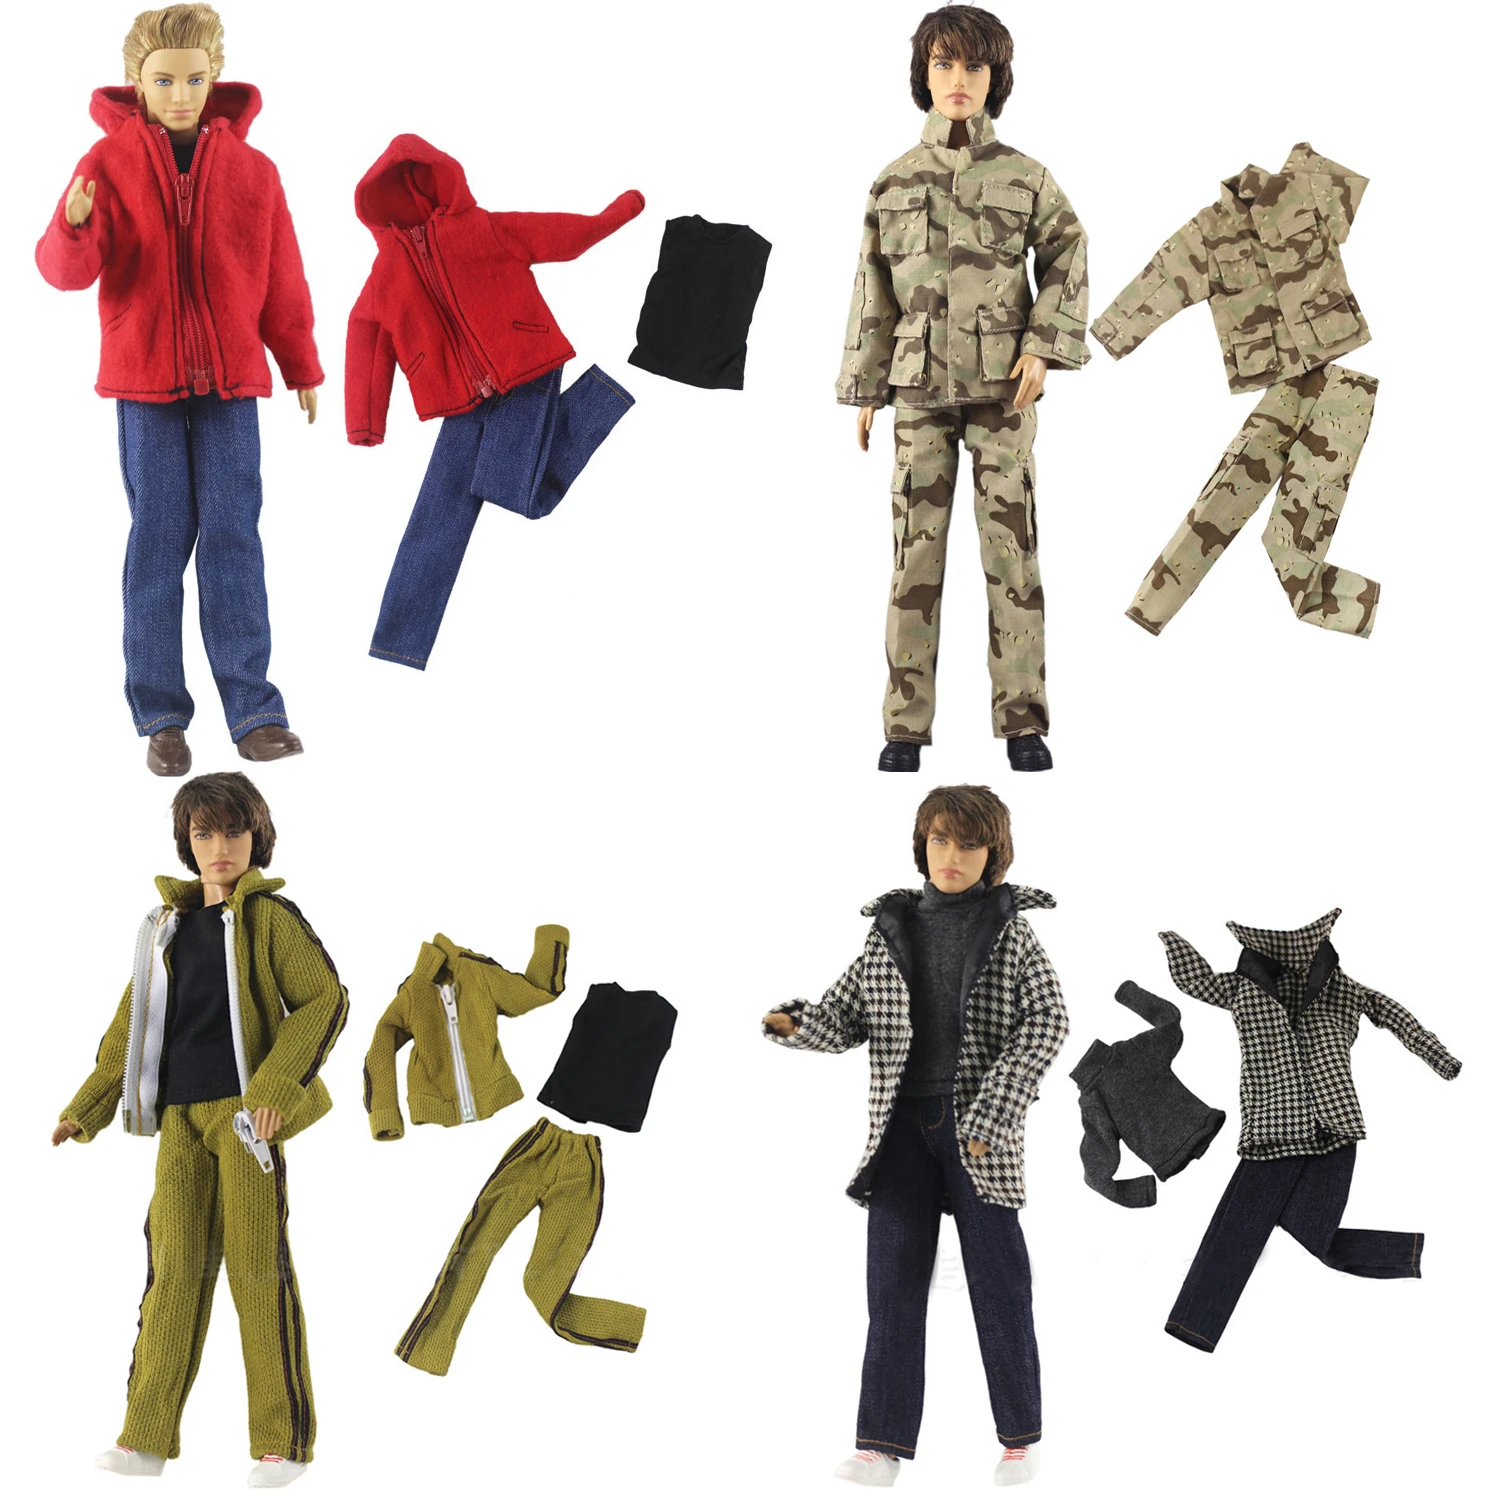 Handmade 1/6 Fashion Outfit Boy Doll Suit Clothes Casual Handsome Clothes Pants For Barbie Doll Boyfriend Ken Doll